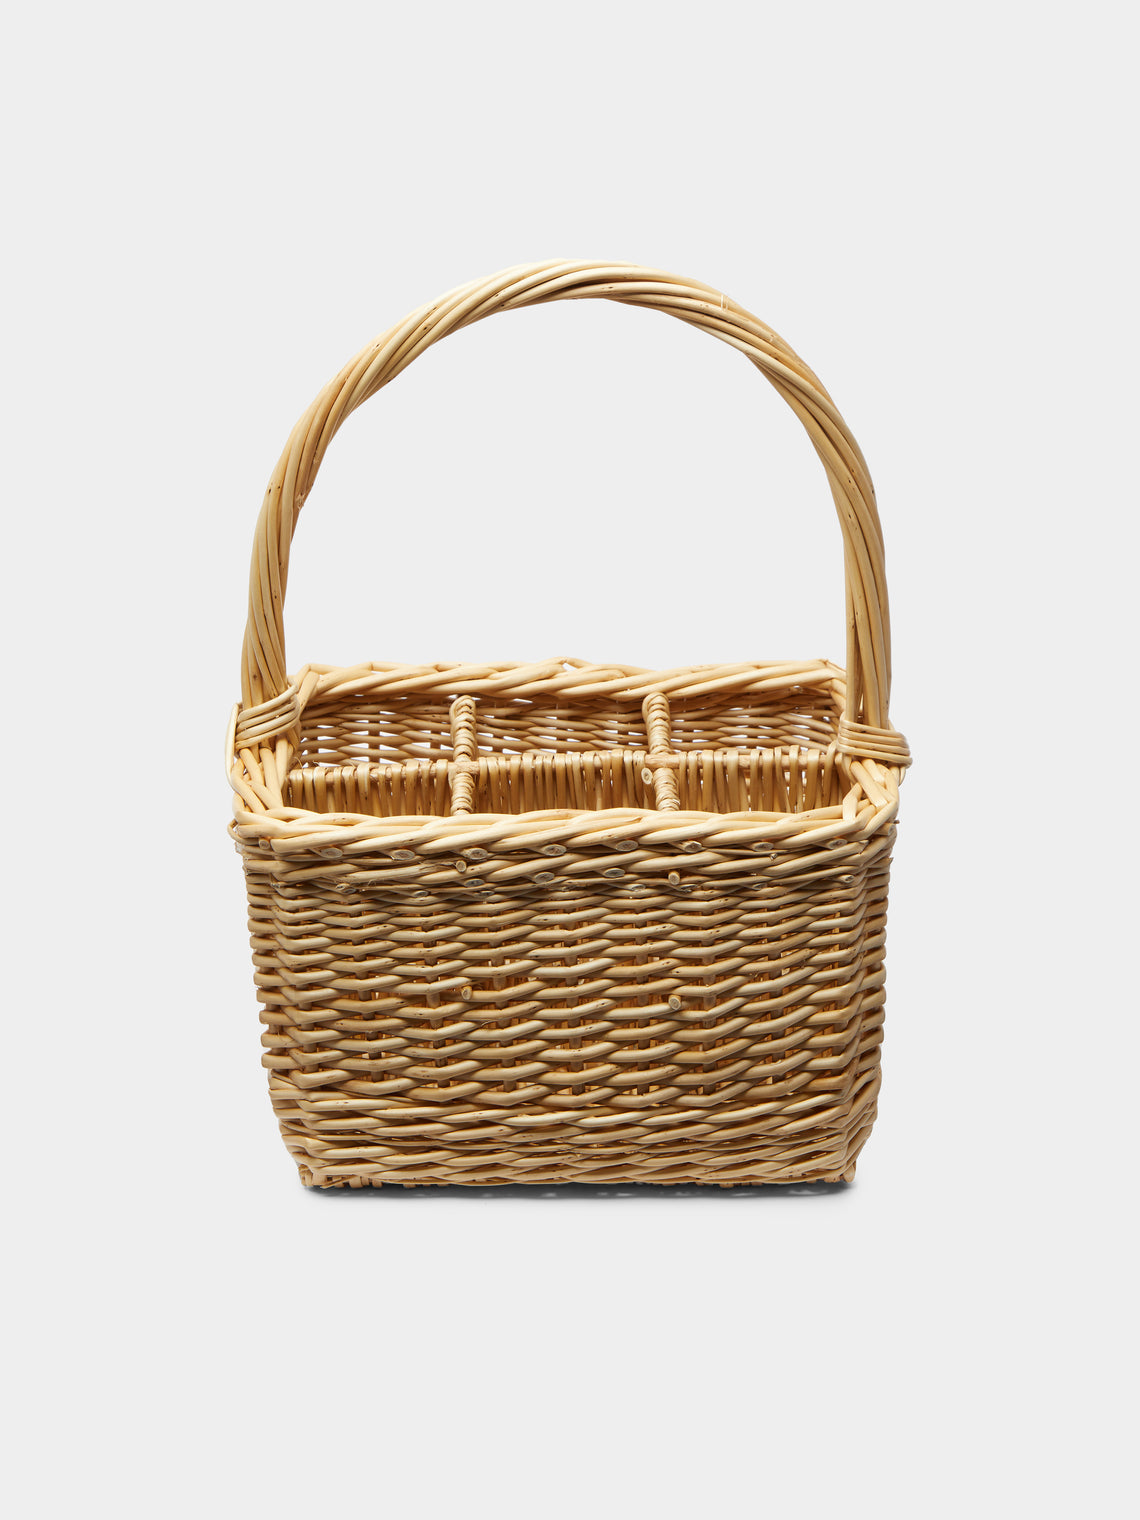 Sussex Willow Baskets - Handwoven Willow Cutlery Basket -  - ABASK